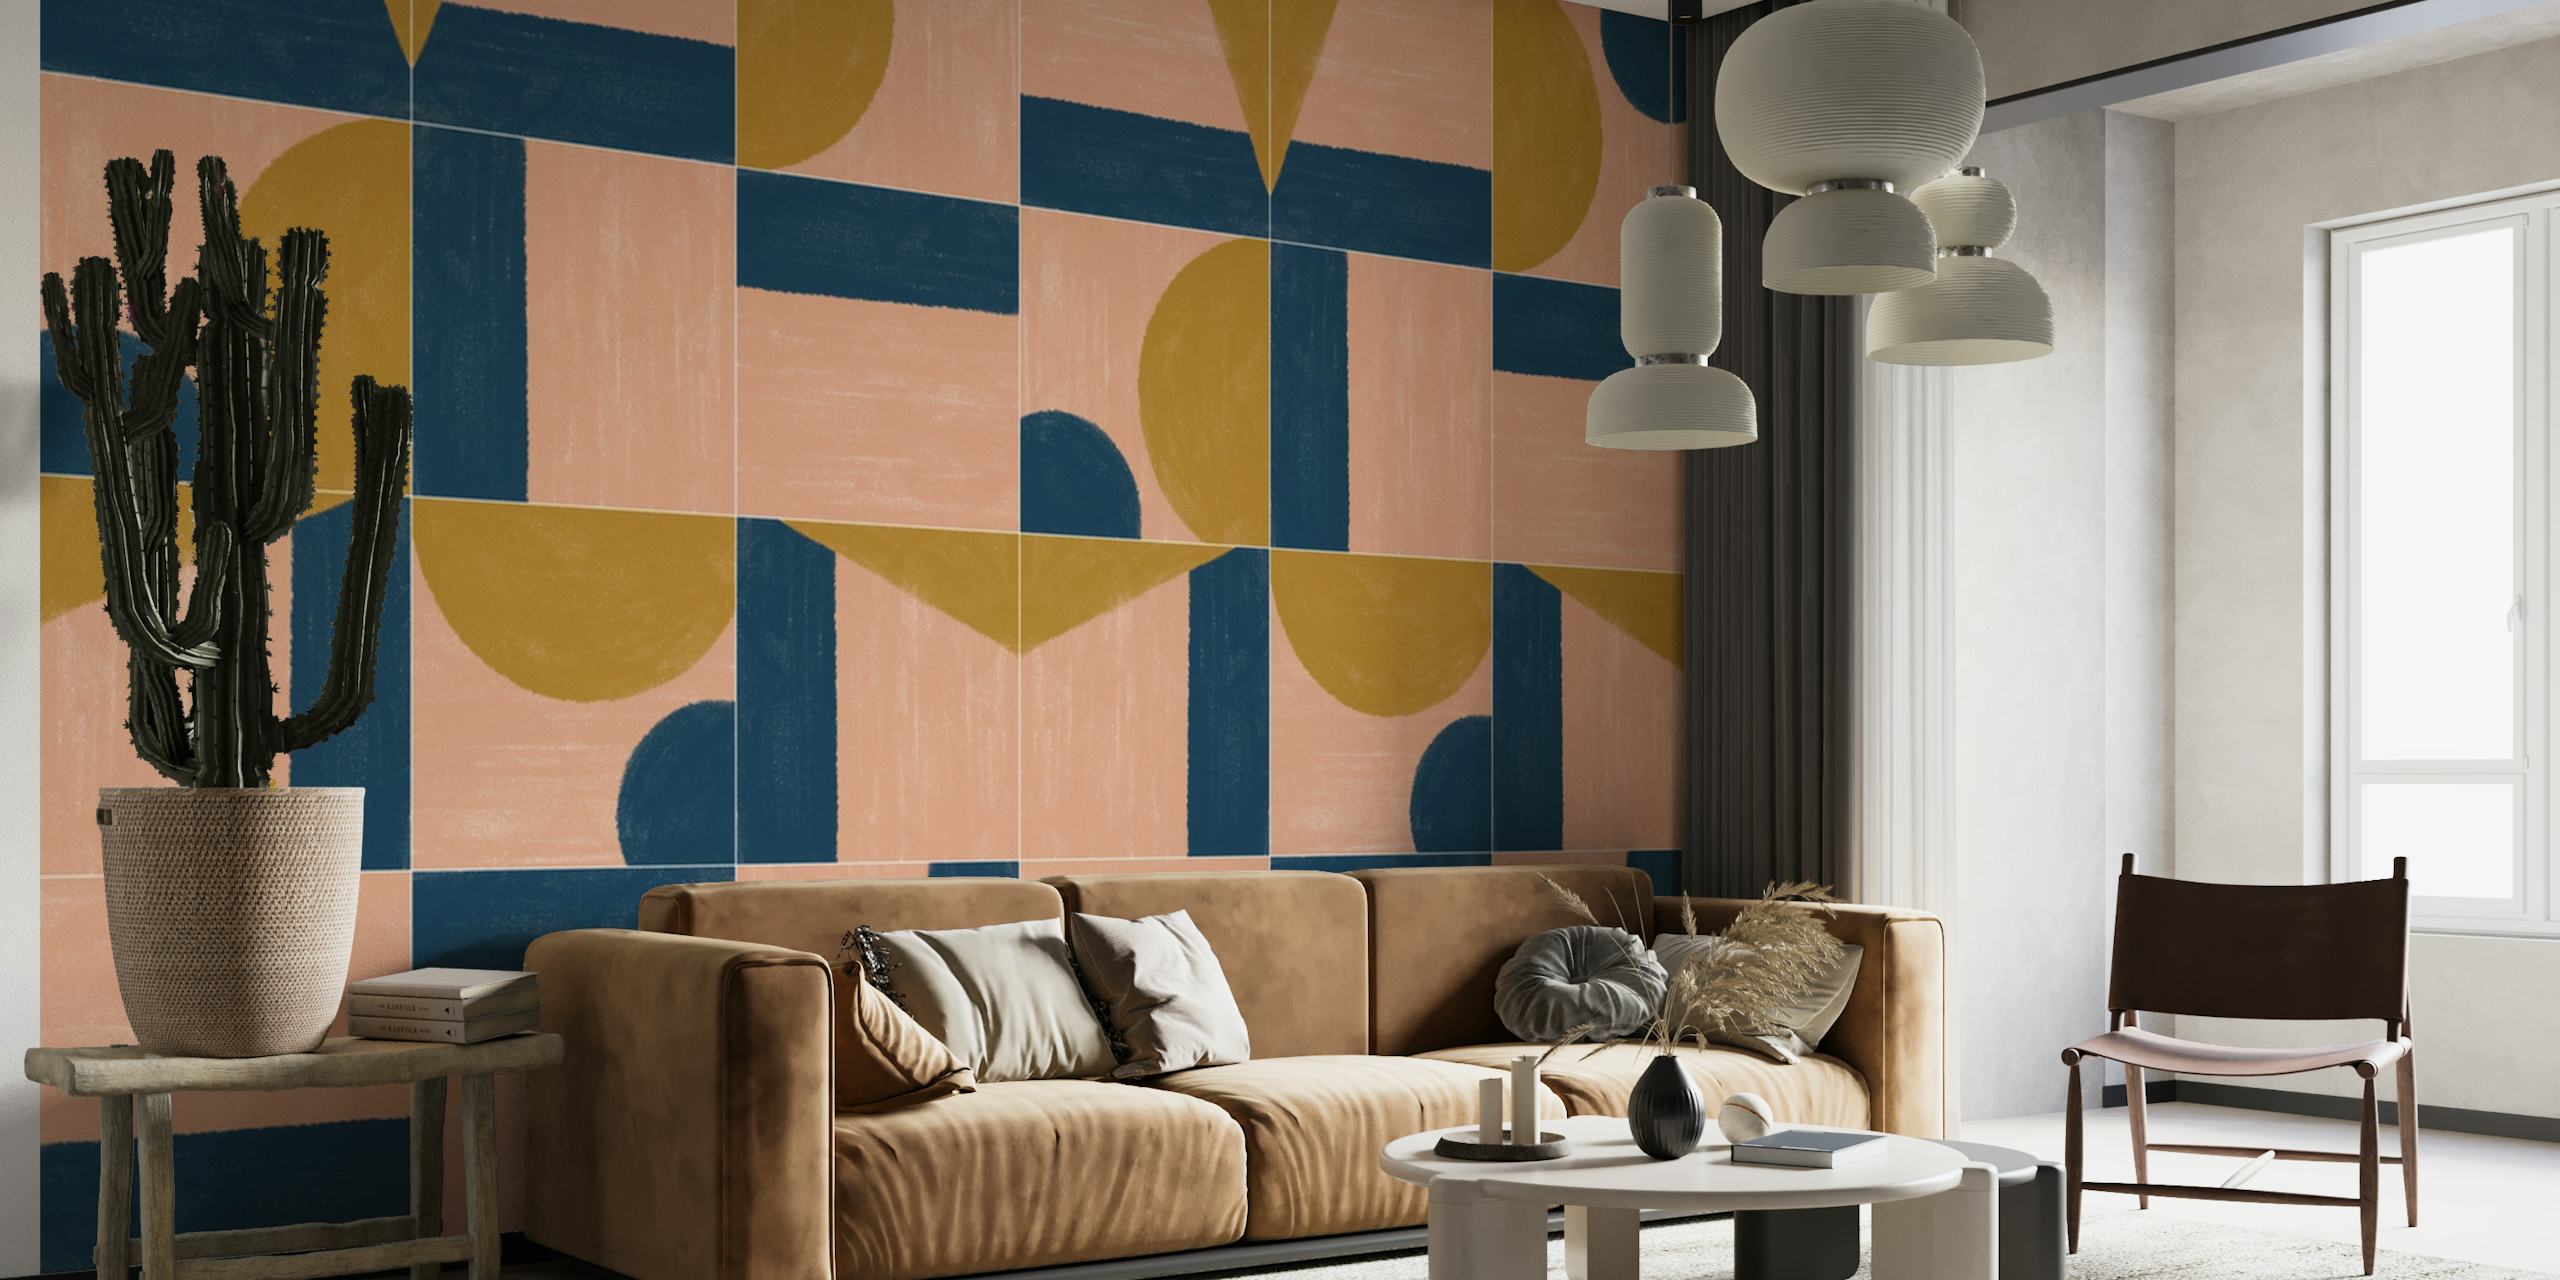 Painted Wall Tiles One wallpaper